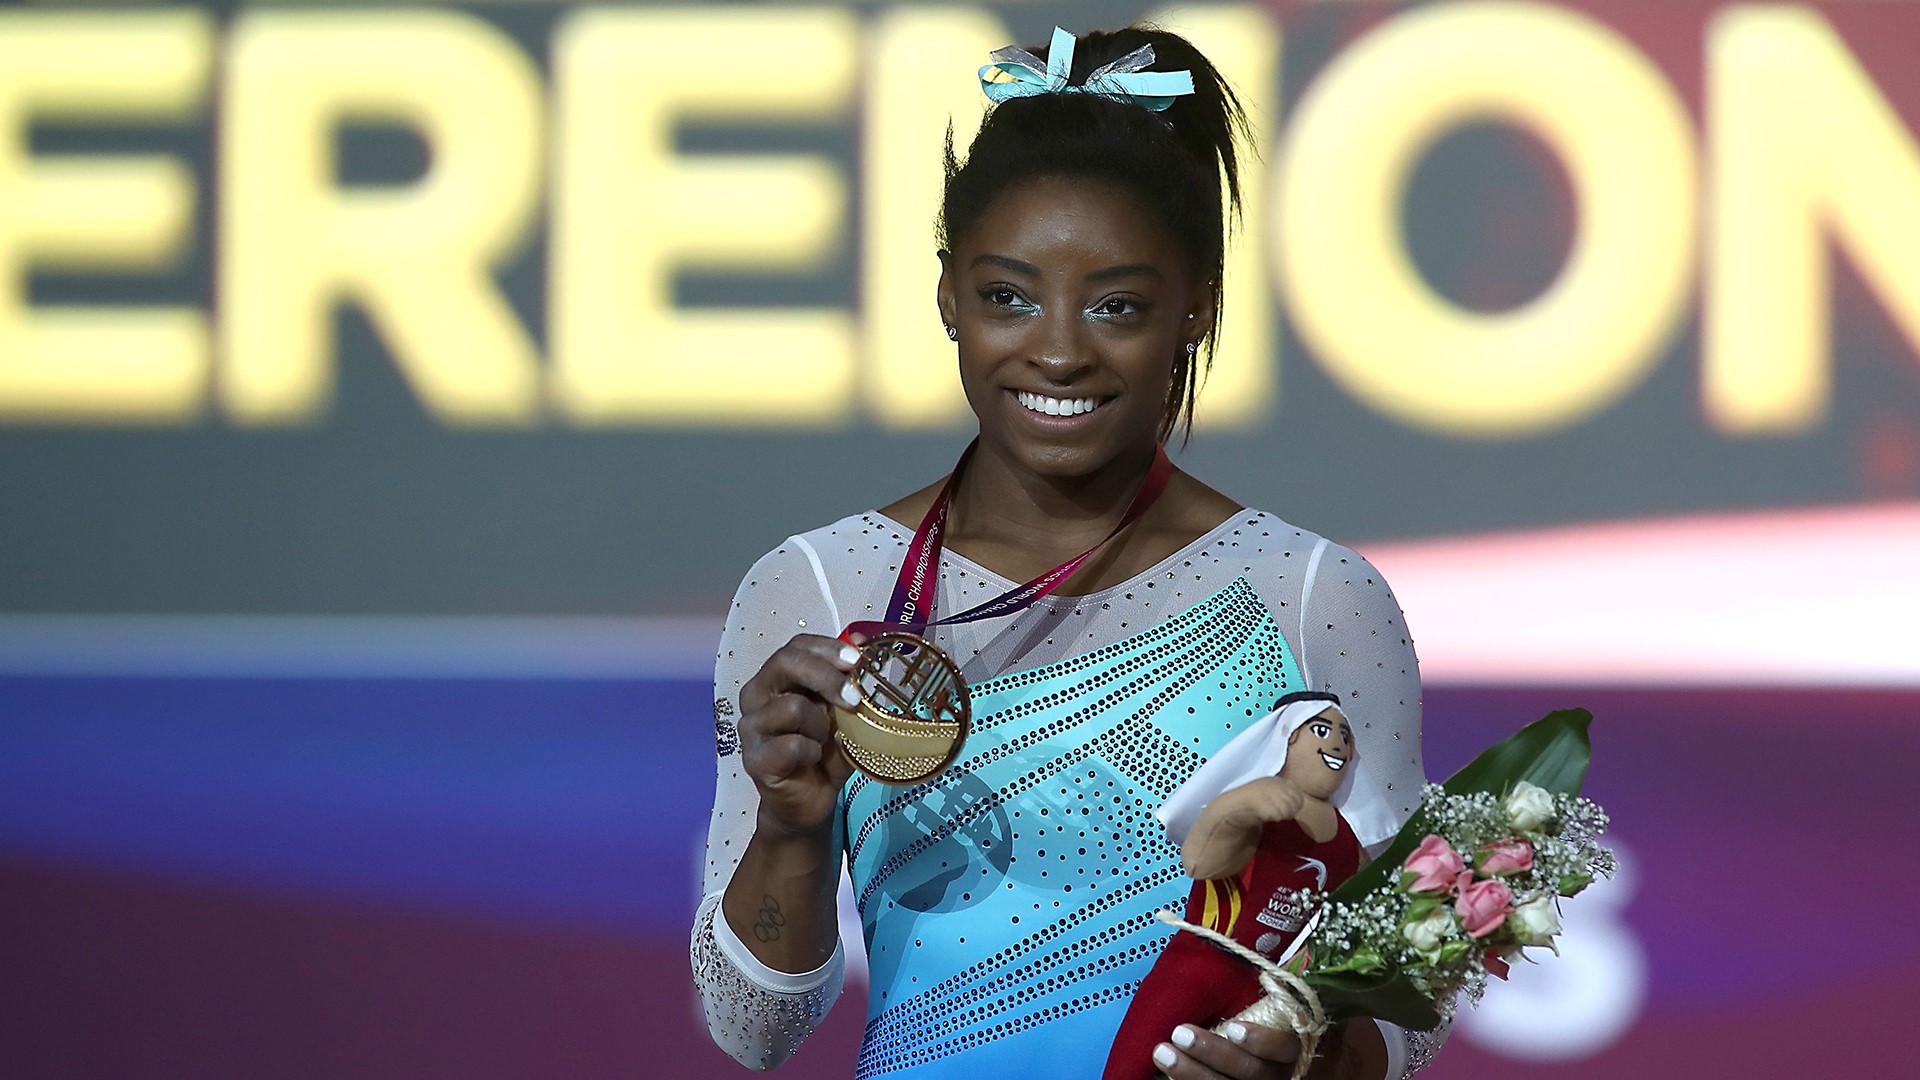 Simone Biles makes history as first woman to win 4 allaround world